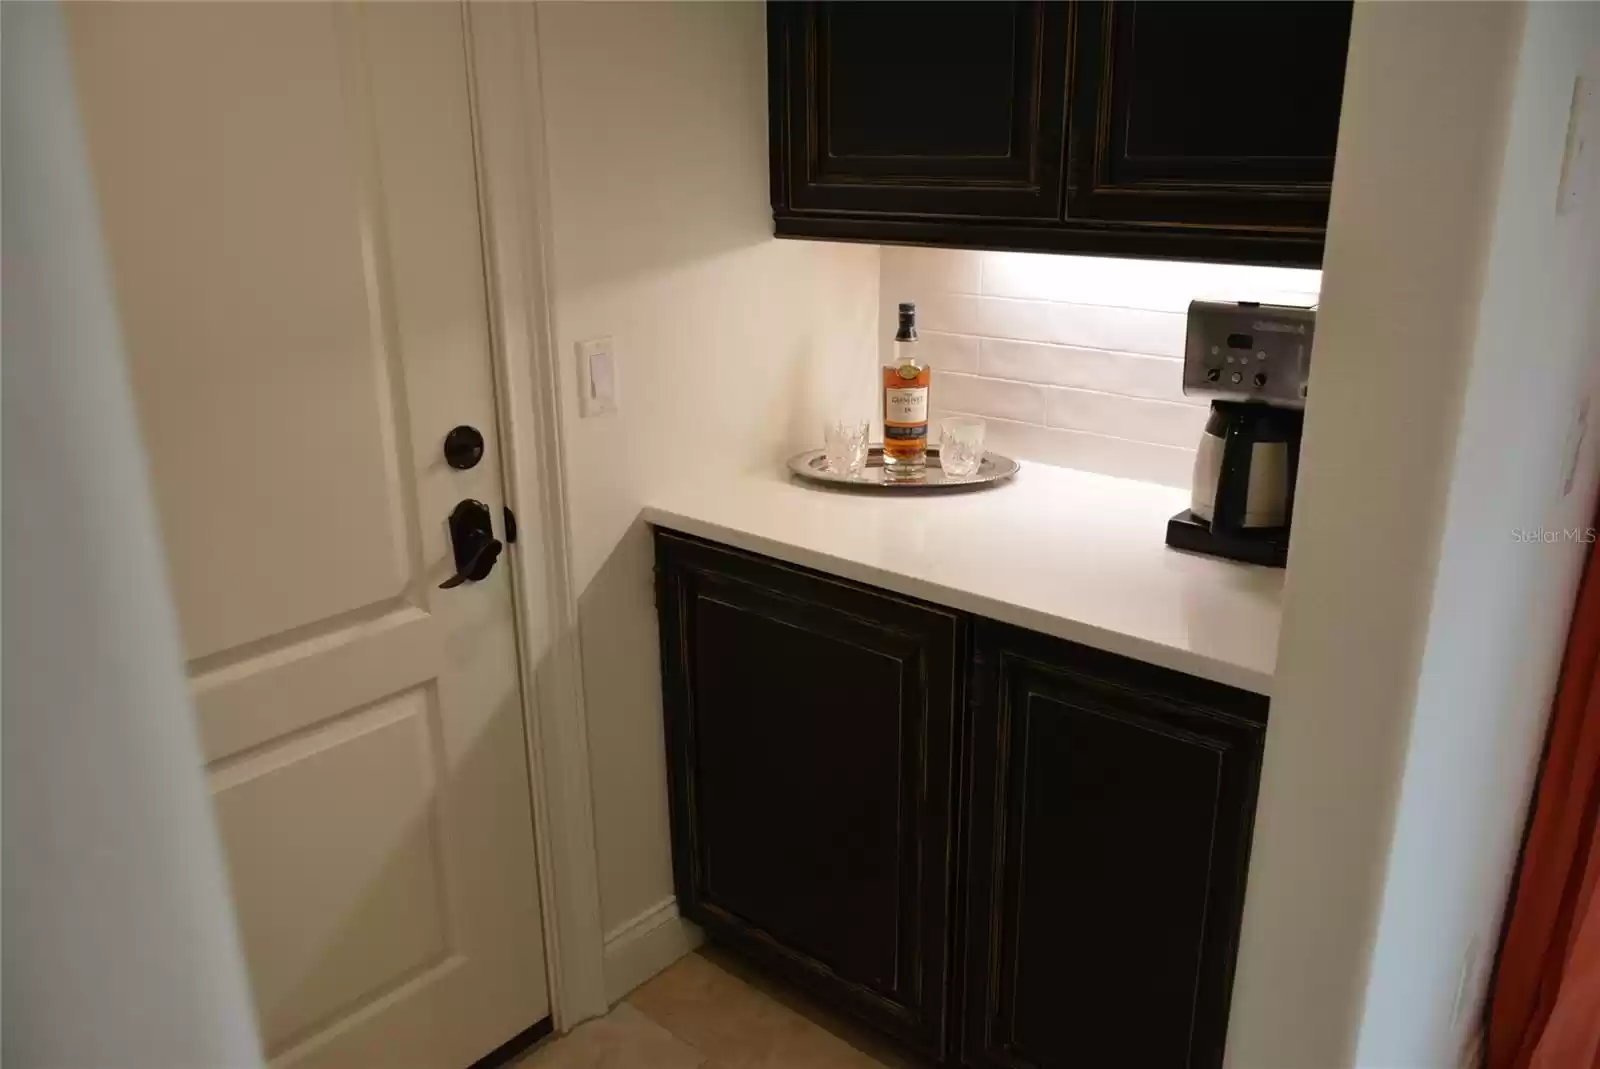 Butler's pantry has a refrigerator/freezer for afternoon drinks and coffee bar for mornings!